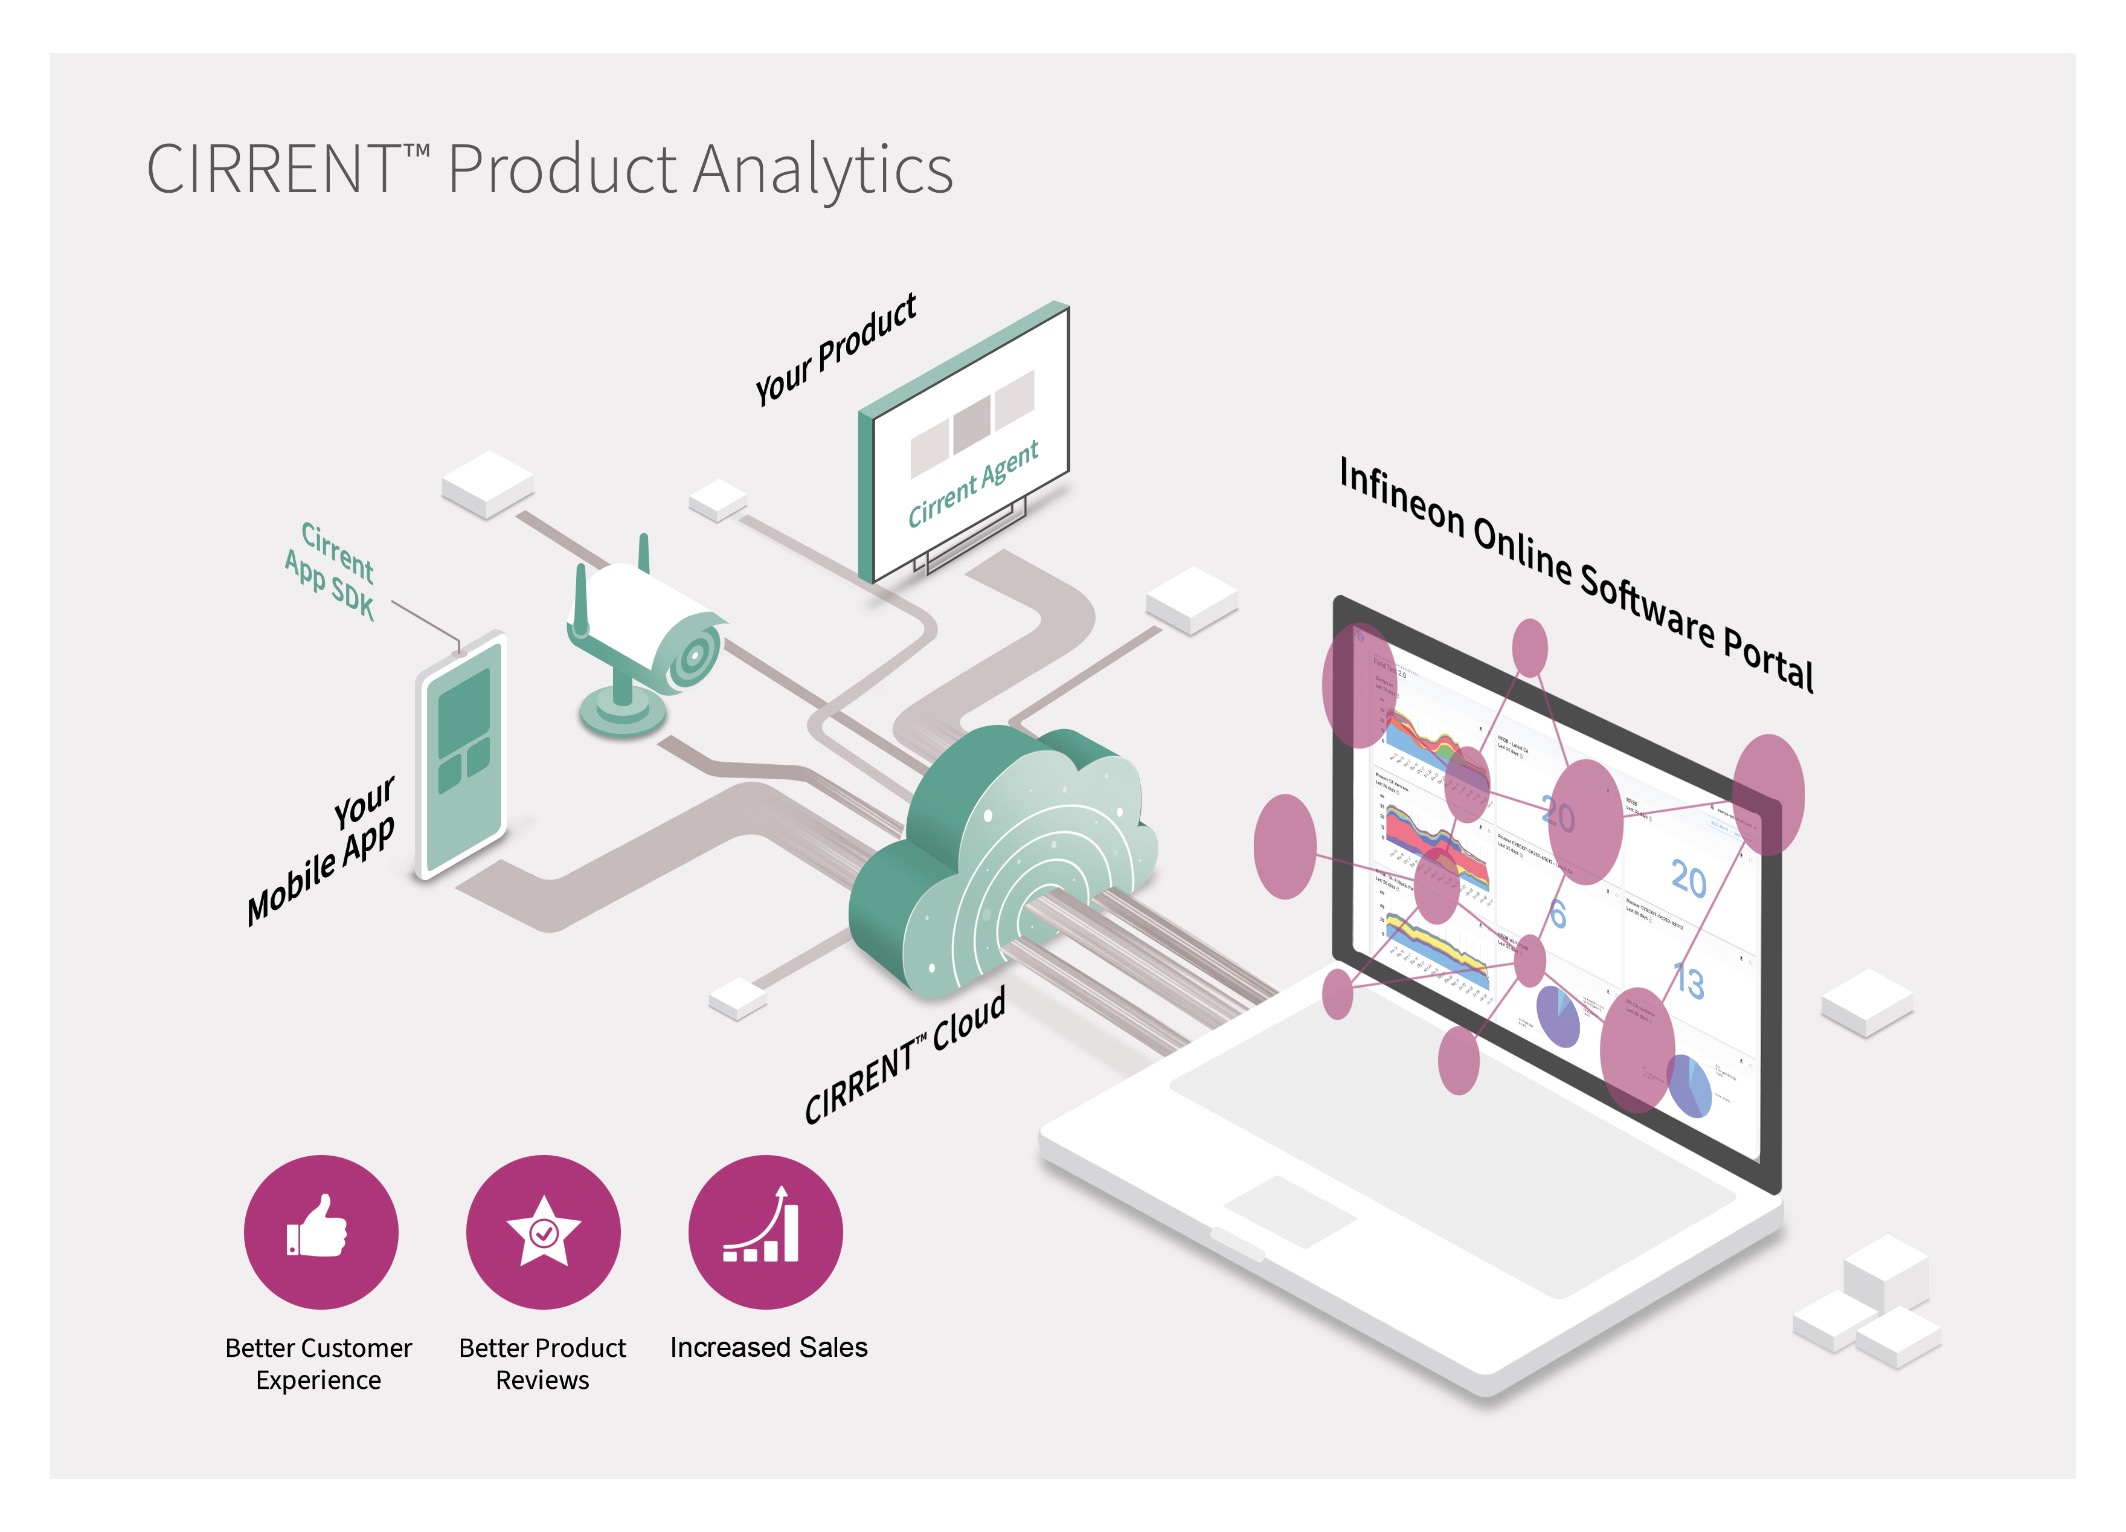 Next-Gen Software as a Service Offering Optimizes Product Development with Intelligent Data